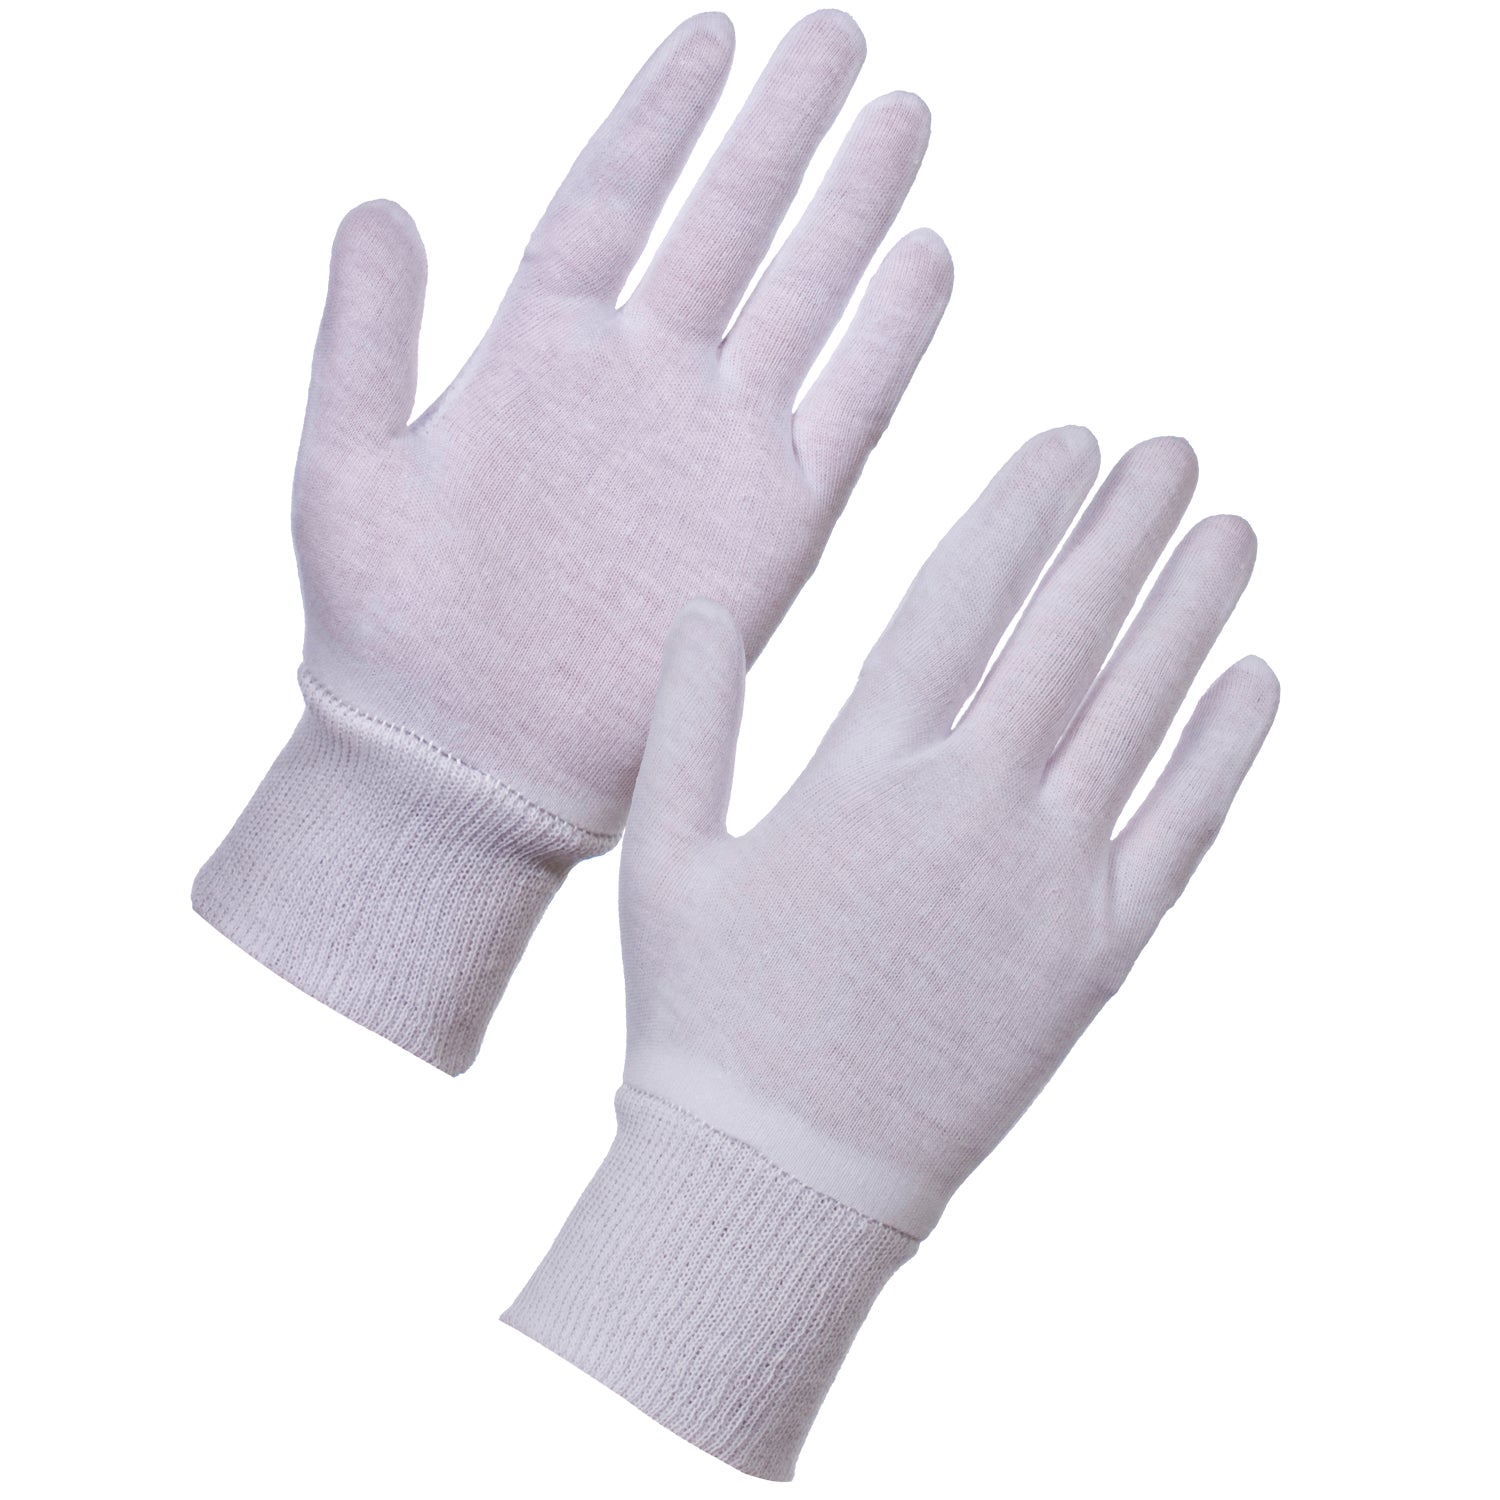 Supertouch Stockinet Liner - Cotton Jersey